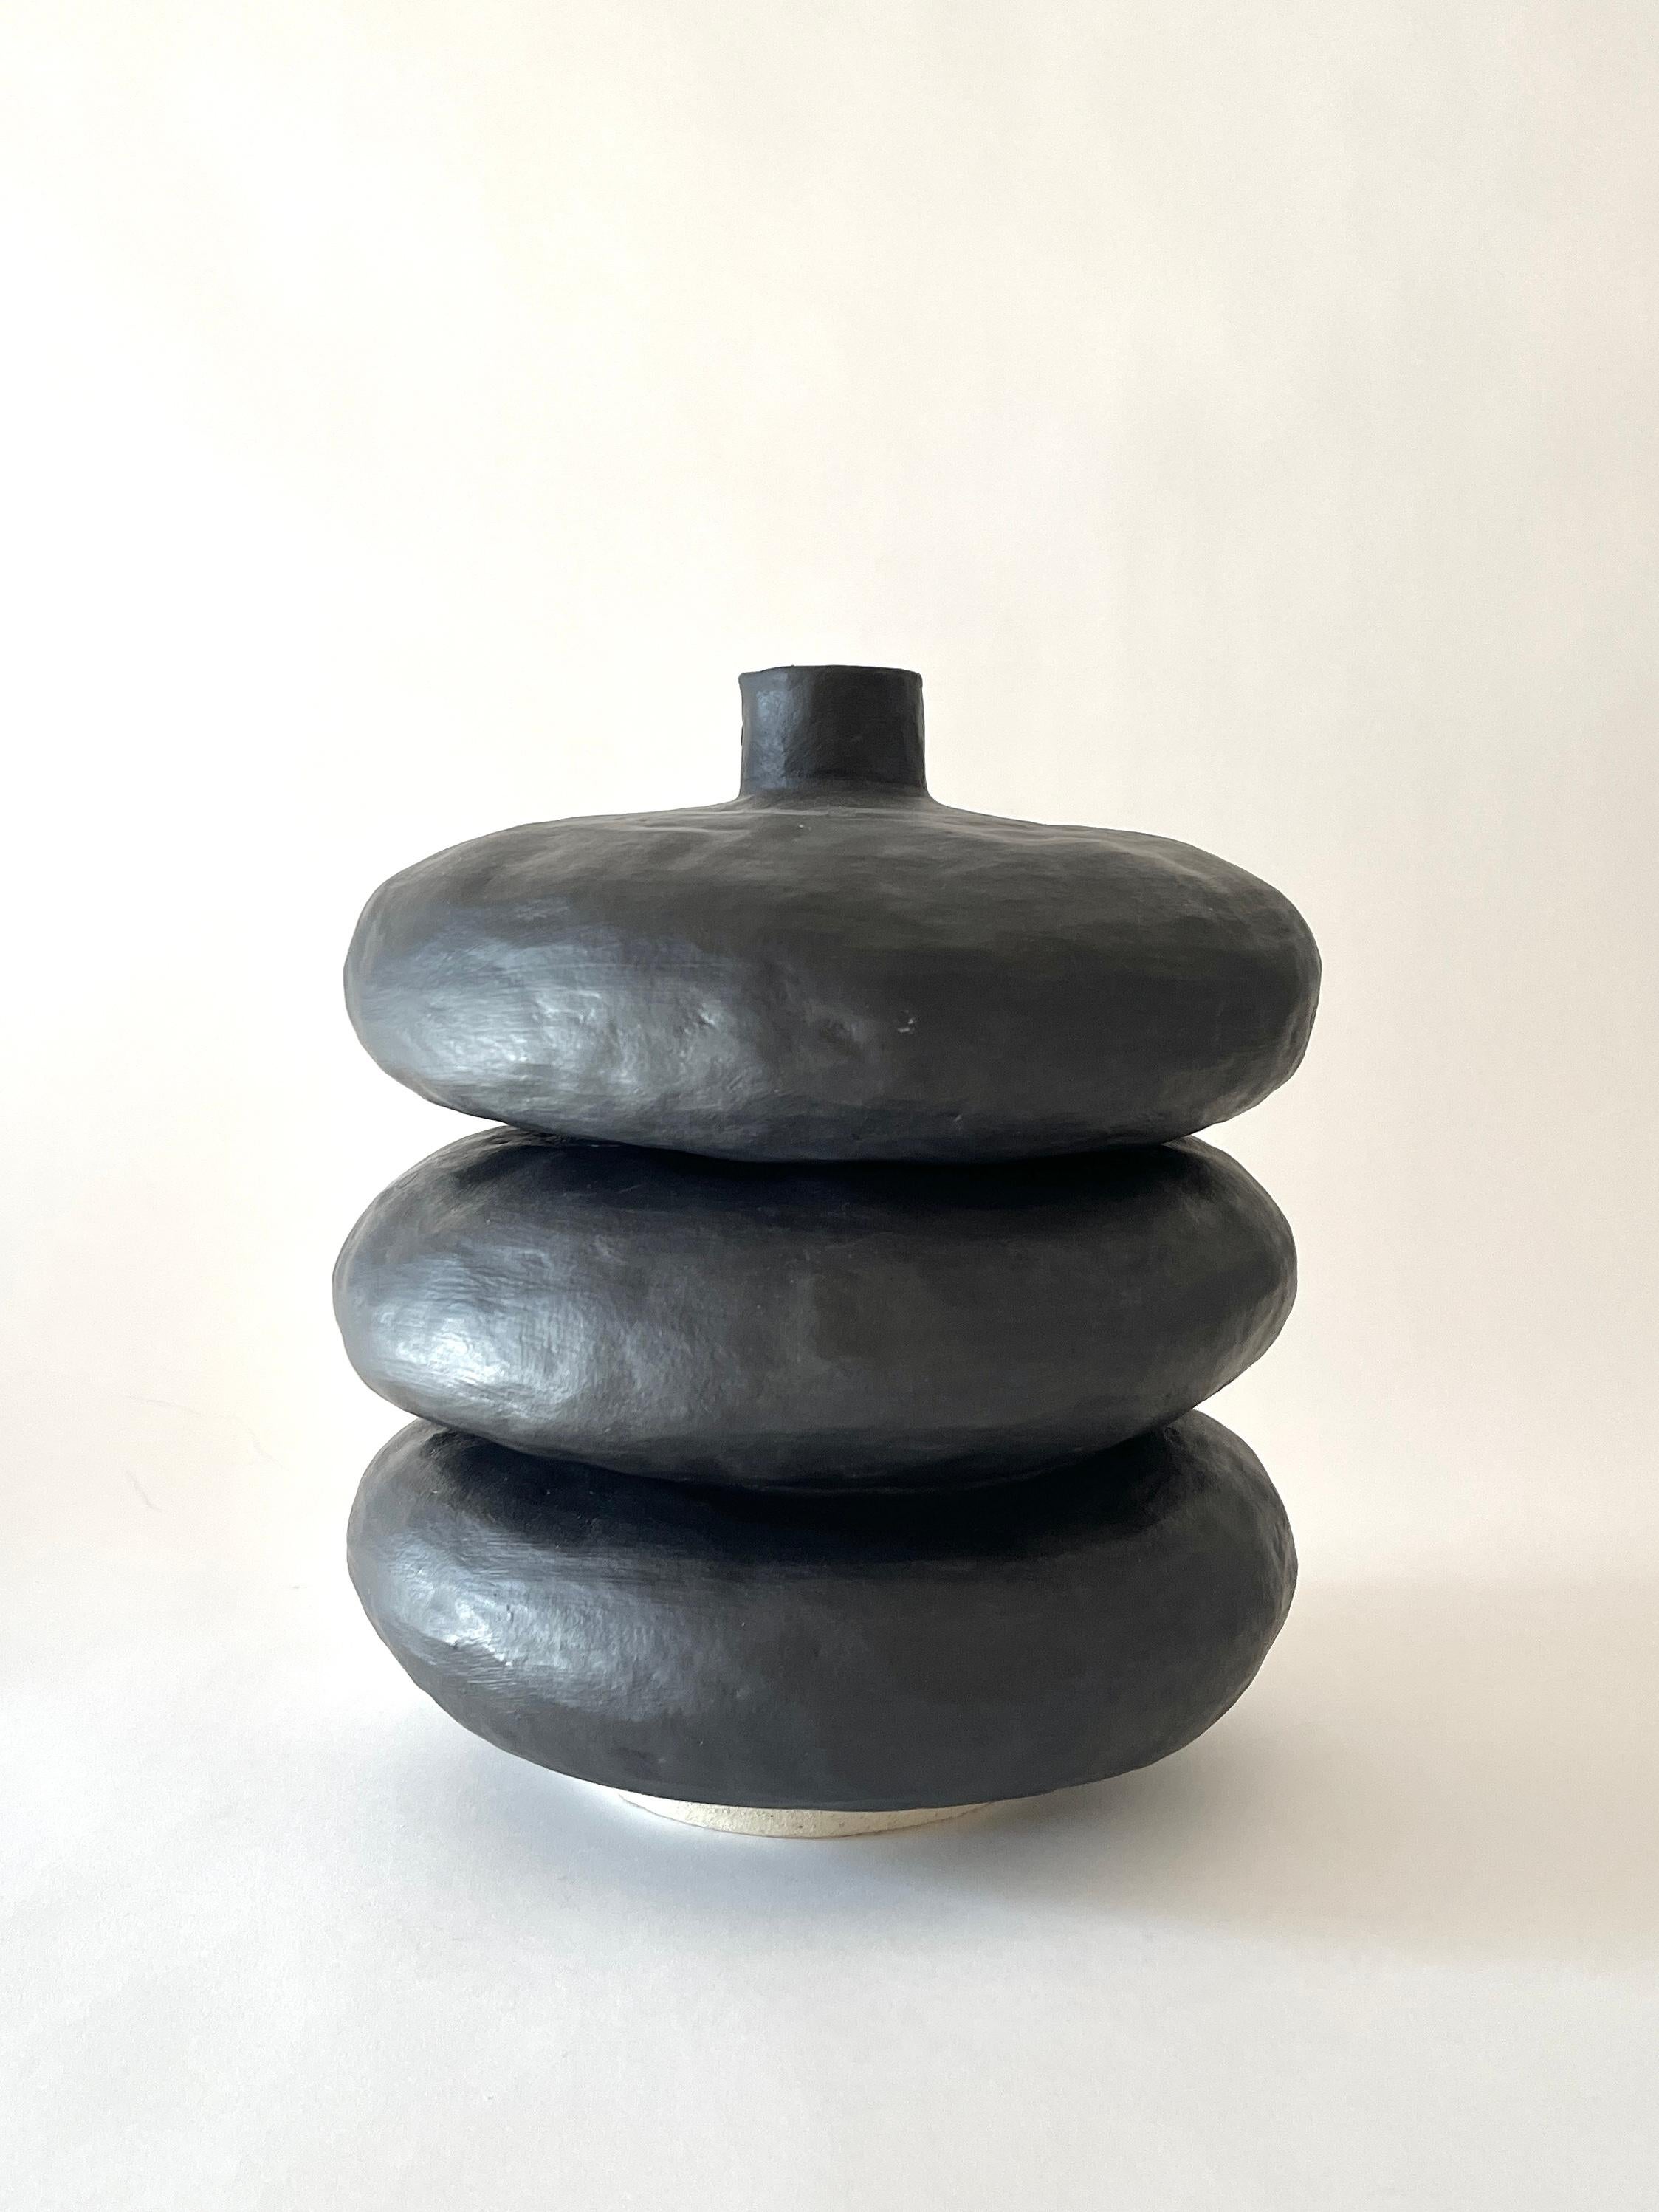 Charlie Black Vase by Meg Morrison
One of a kind.
Materials: ceramic.
Dimensions: Ø 23 x H 25.5 cm.

Also available in Yellow, Pink and White finishes. 

All sizes are approximate. Although vases are watertight condensation may form on the